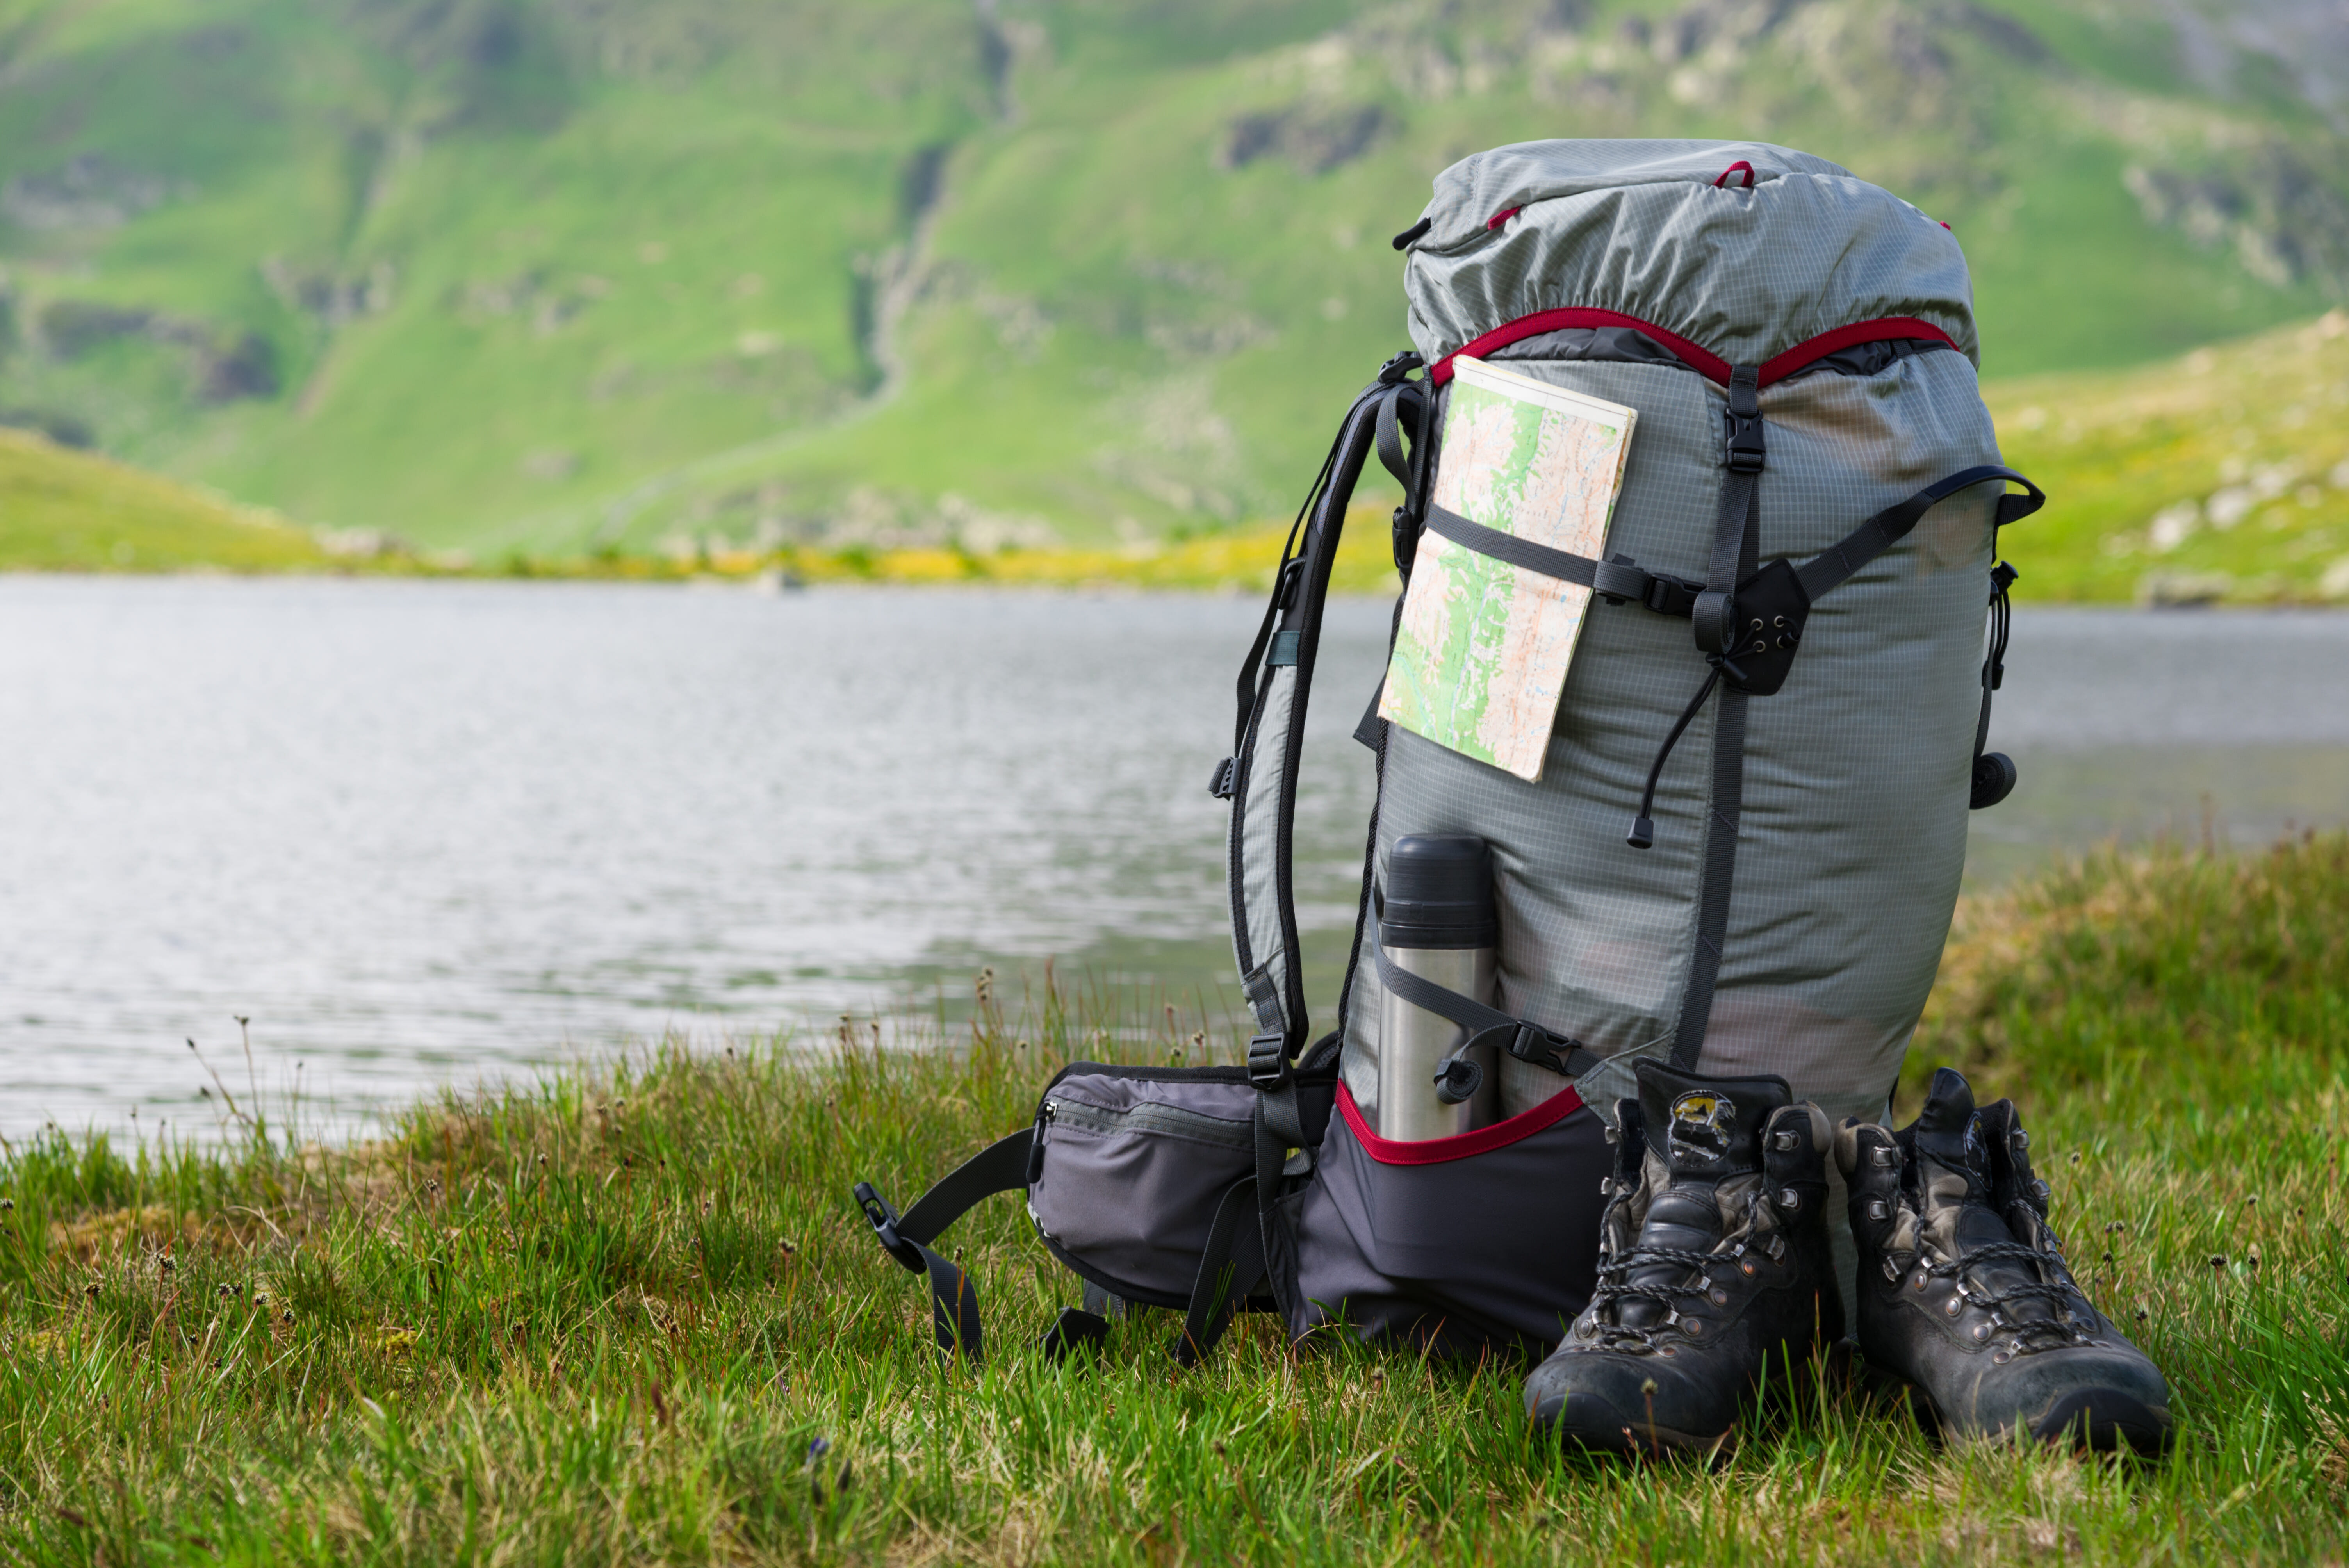 Pack essentials in your hiking gear